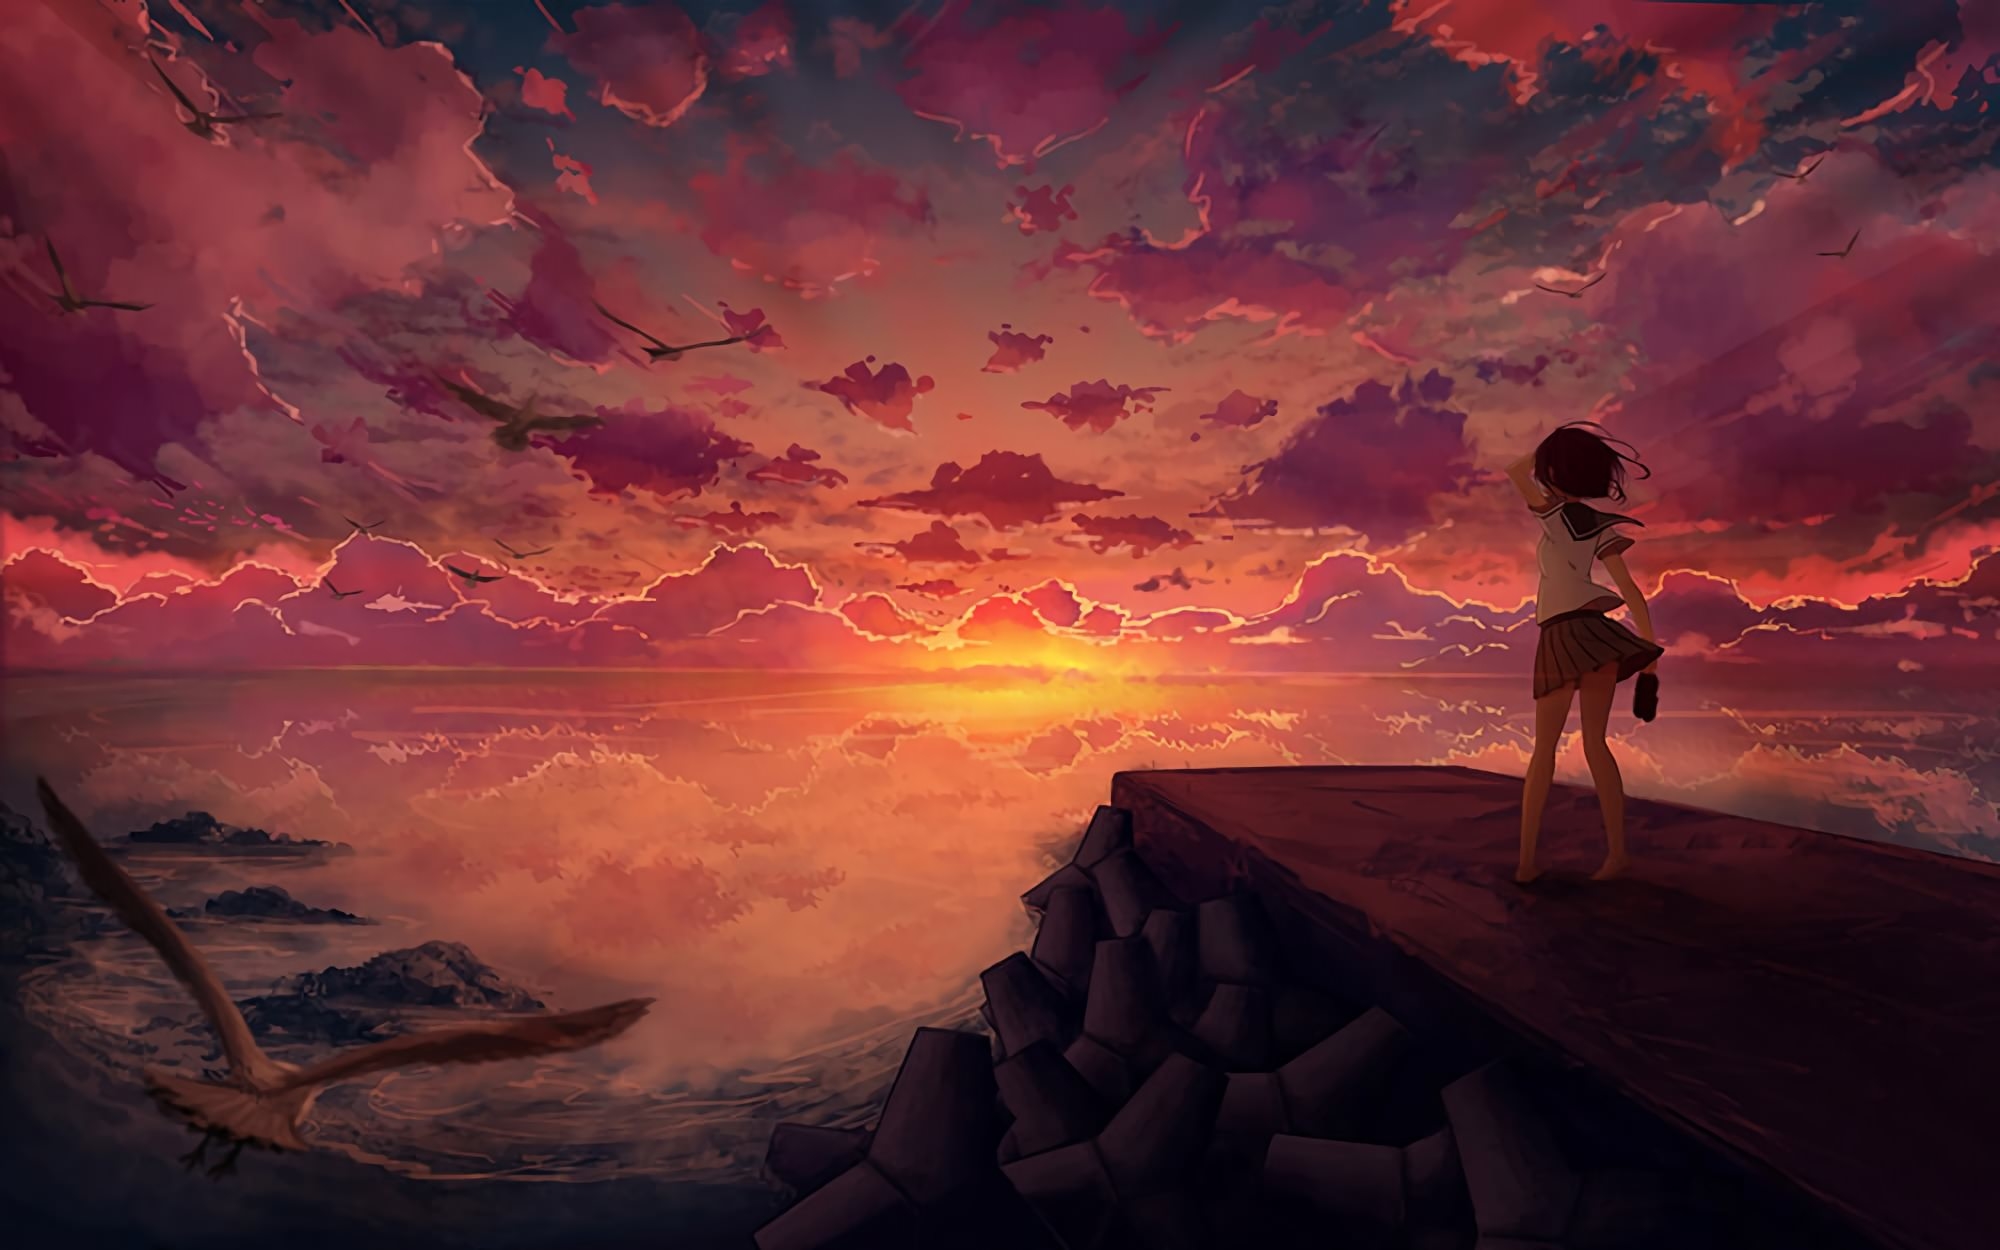 1920x1339 Anime Girl Looking at Sky 1920x1339 Resolution Wallpaper, HD ...
